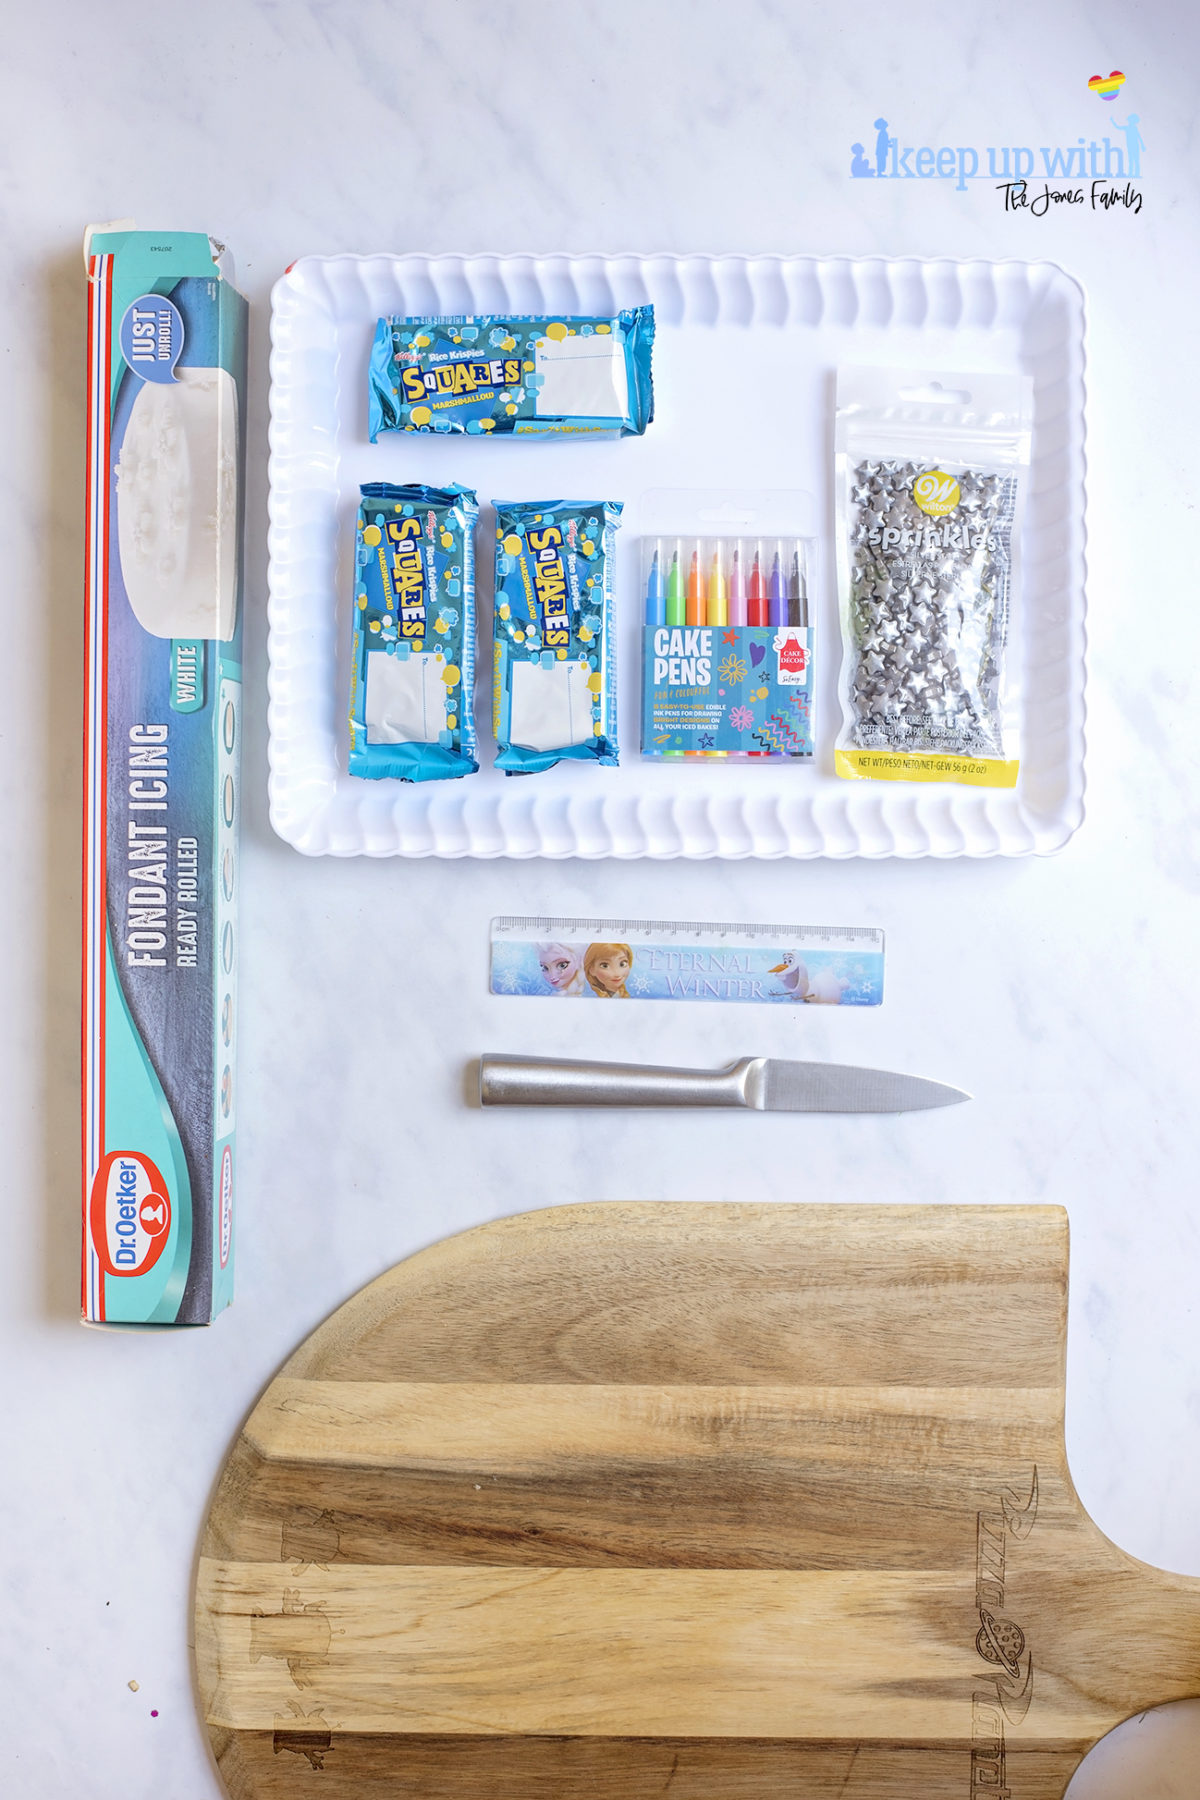 Image shows ingredients for Back to School Rice Krispie treats on a white scalloped tray, sitting on a white marble surface. There are Rice Krispies Squares Bars, sprinkles, white pre-rolled royal icing fondant, cake pens, a ruler, knife and shopping board. Image by Sara-Jayne from Keep Up With The Jones Family.